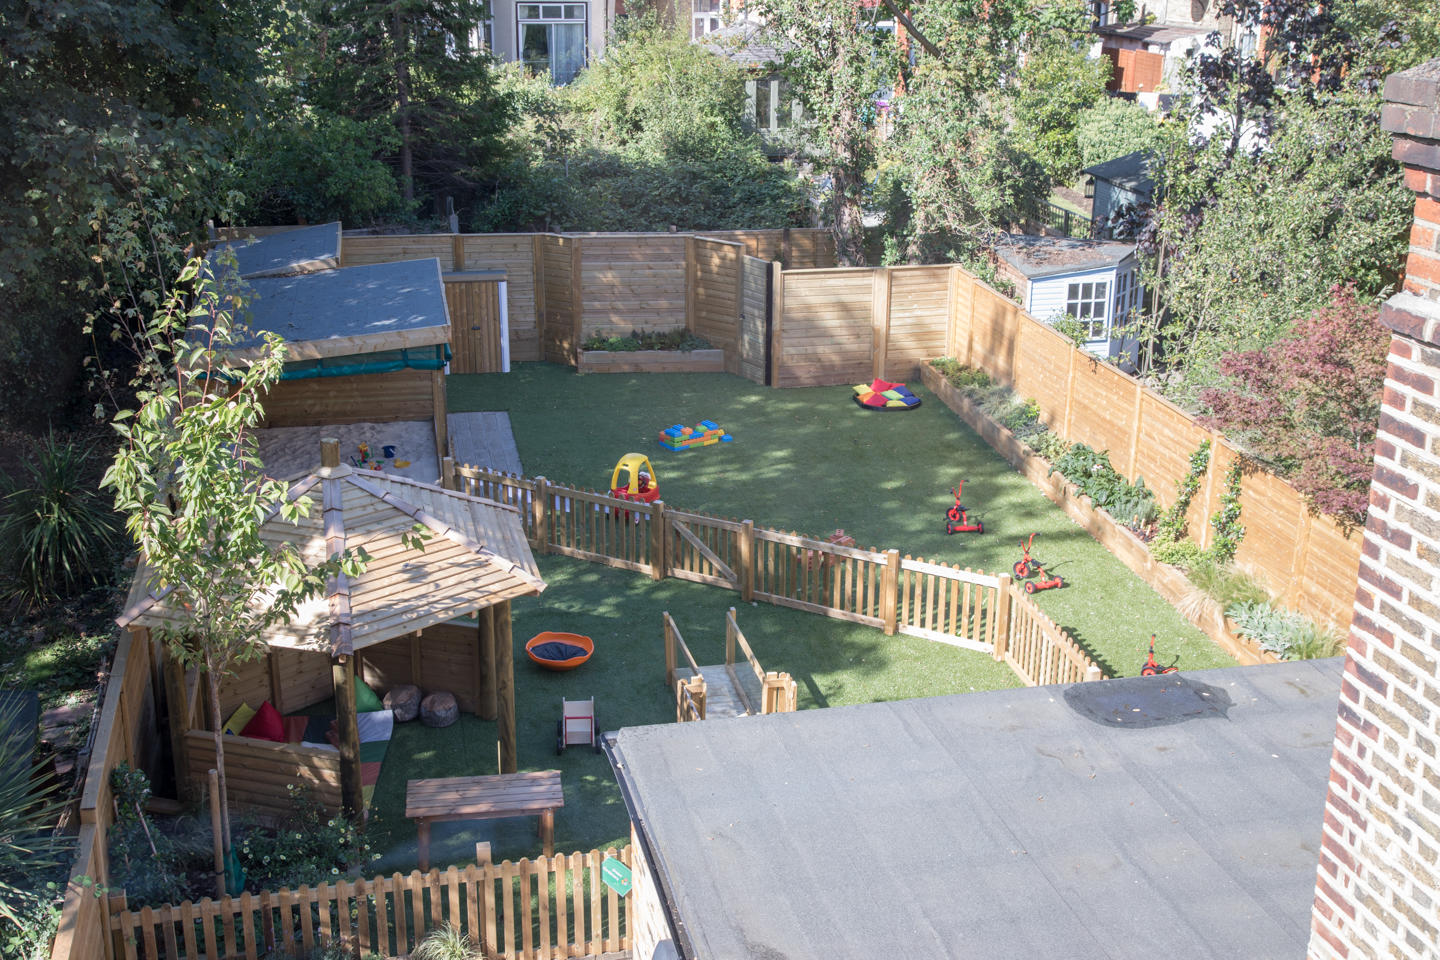 Images Bright Horizons Palmers Green Day Nursery and Preschool